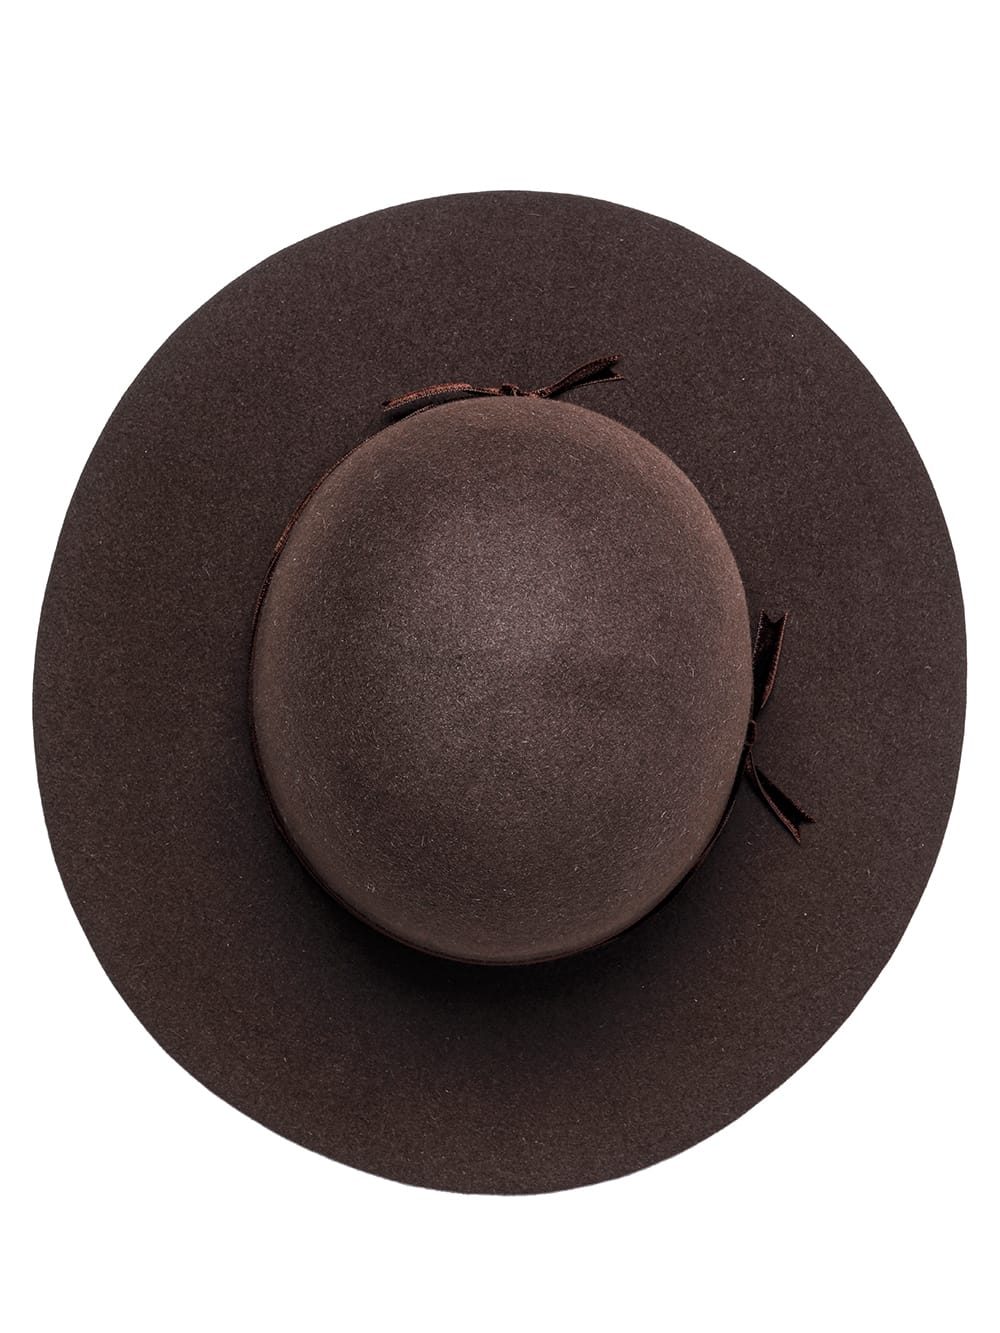 sa.0015AW23-brown bowler hat./velvet ribbon. THE TWO OF US 2023